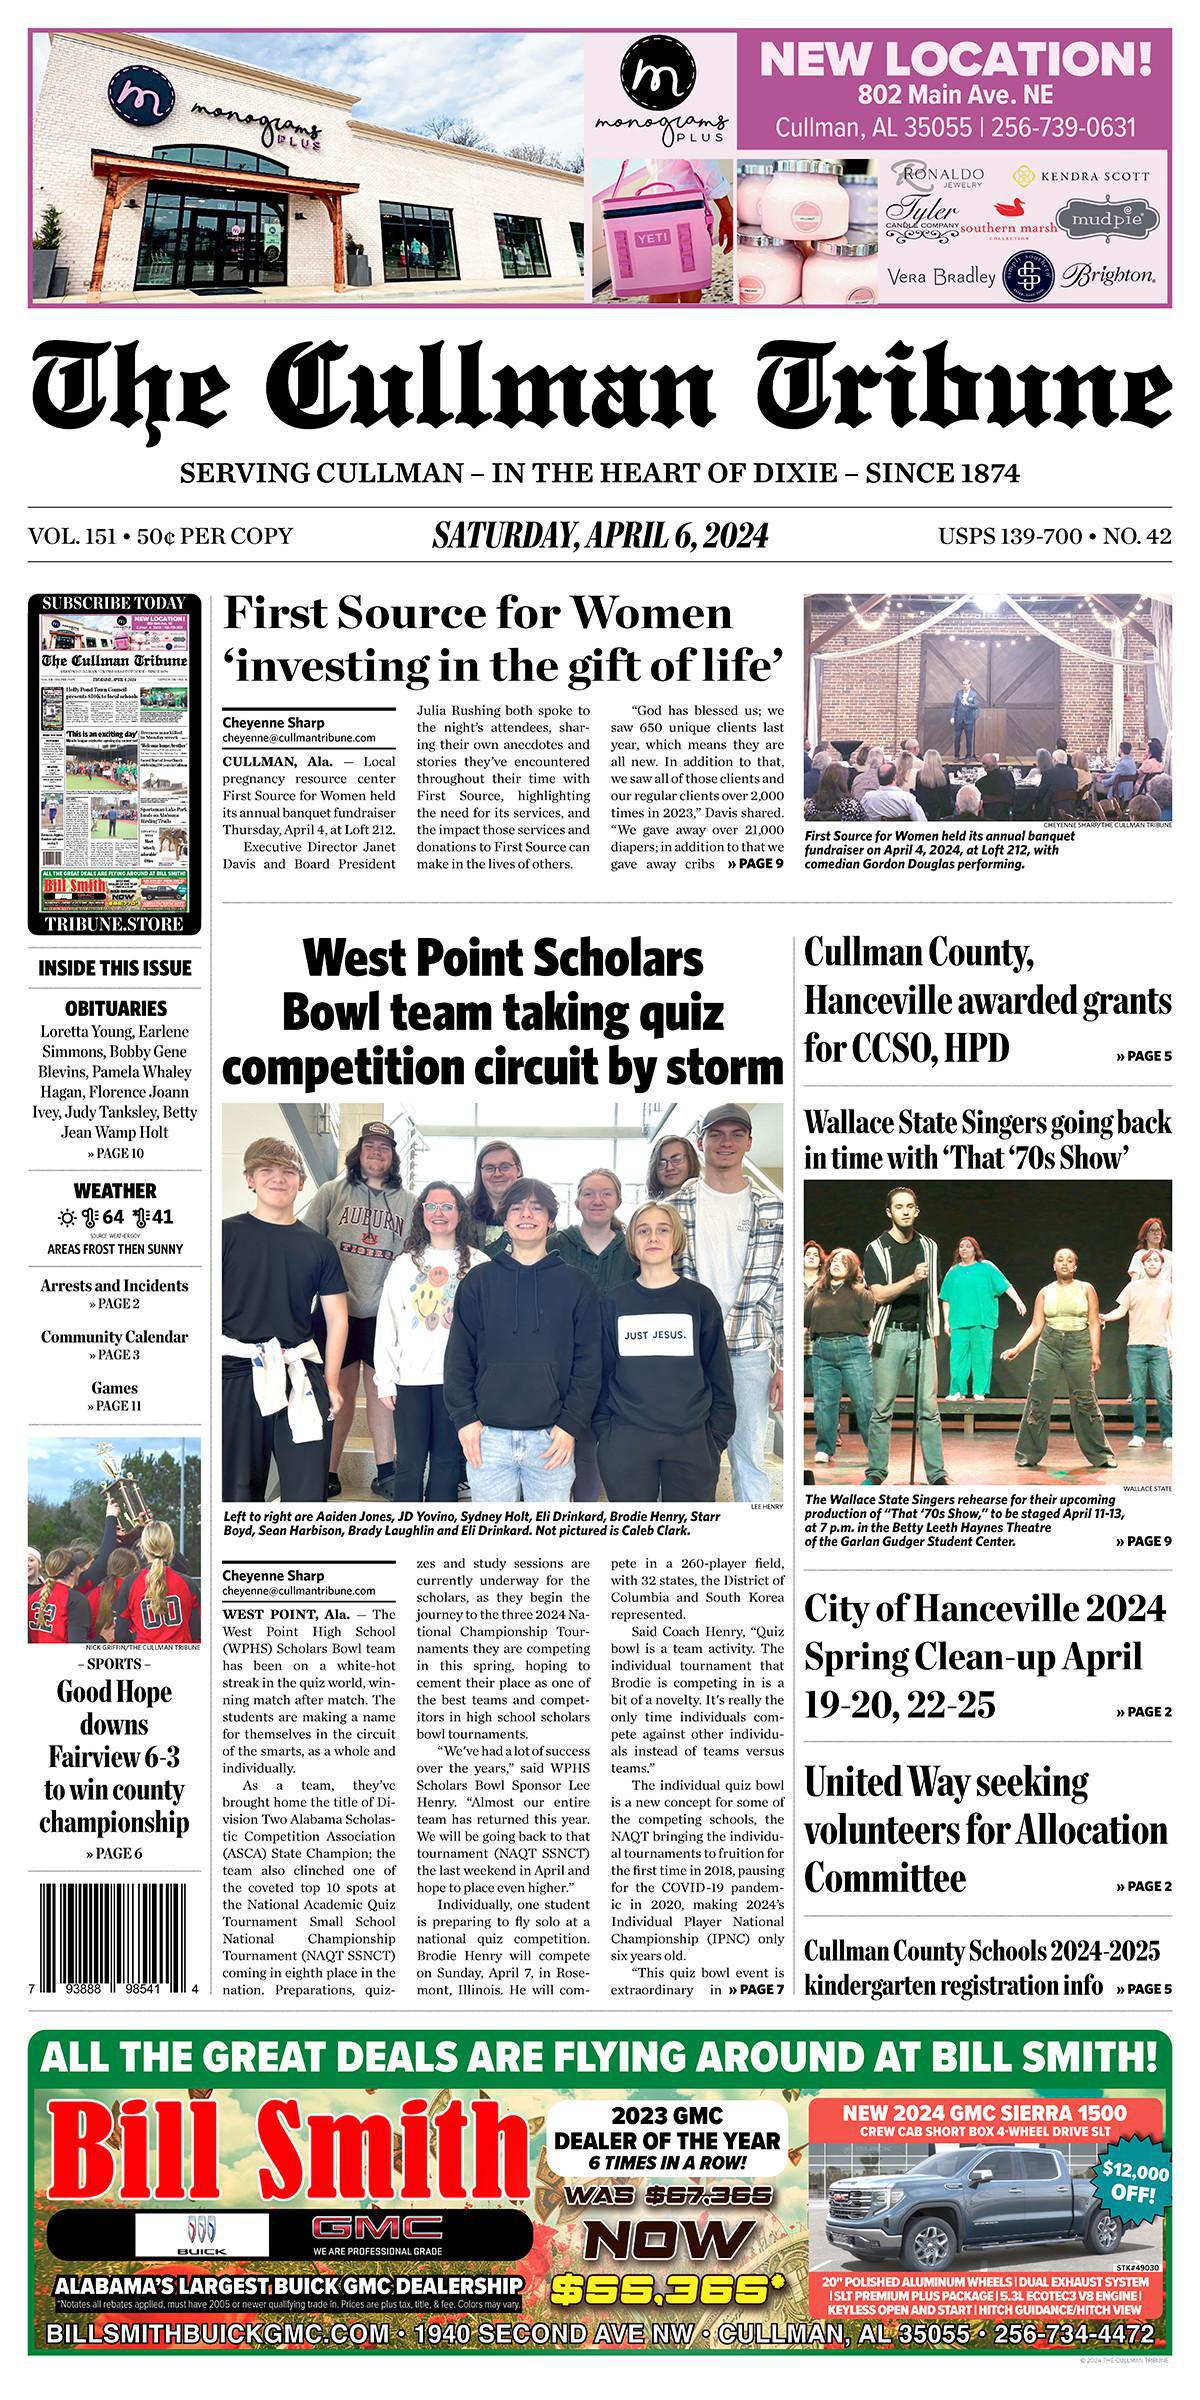 Good Morning Cullman! The 04-06-2024 edition of the Cullman Tribune is now ready to view.